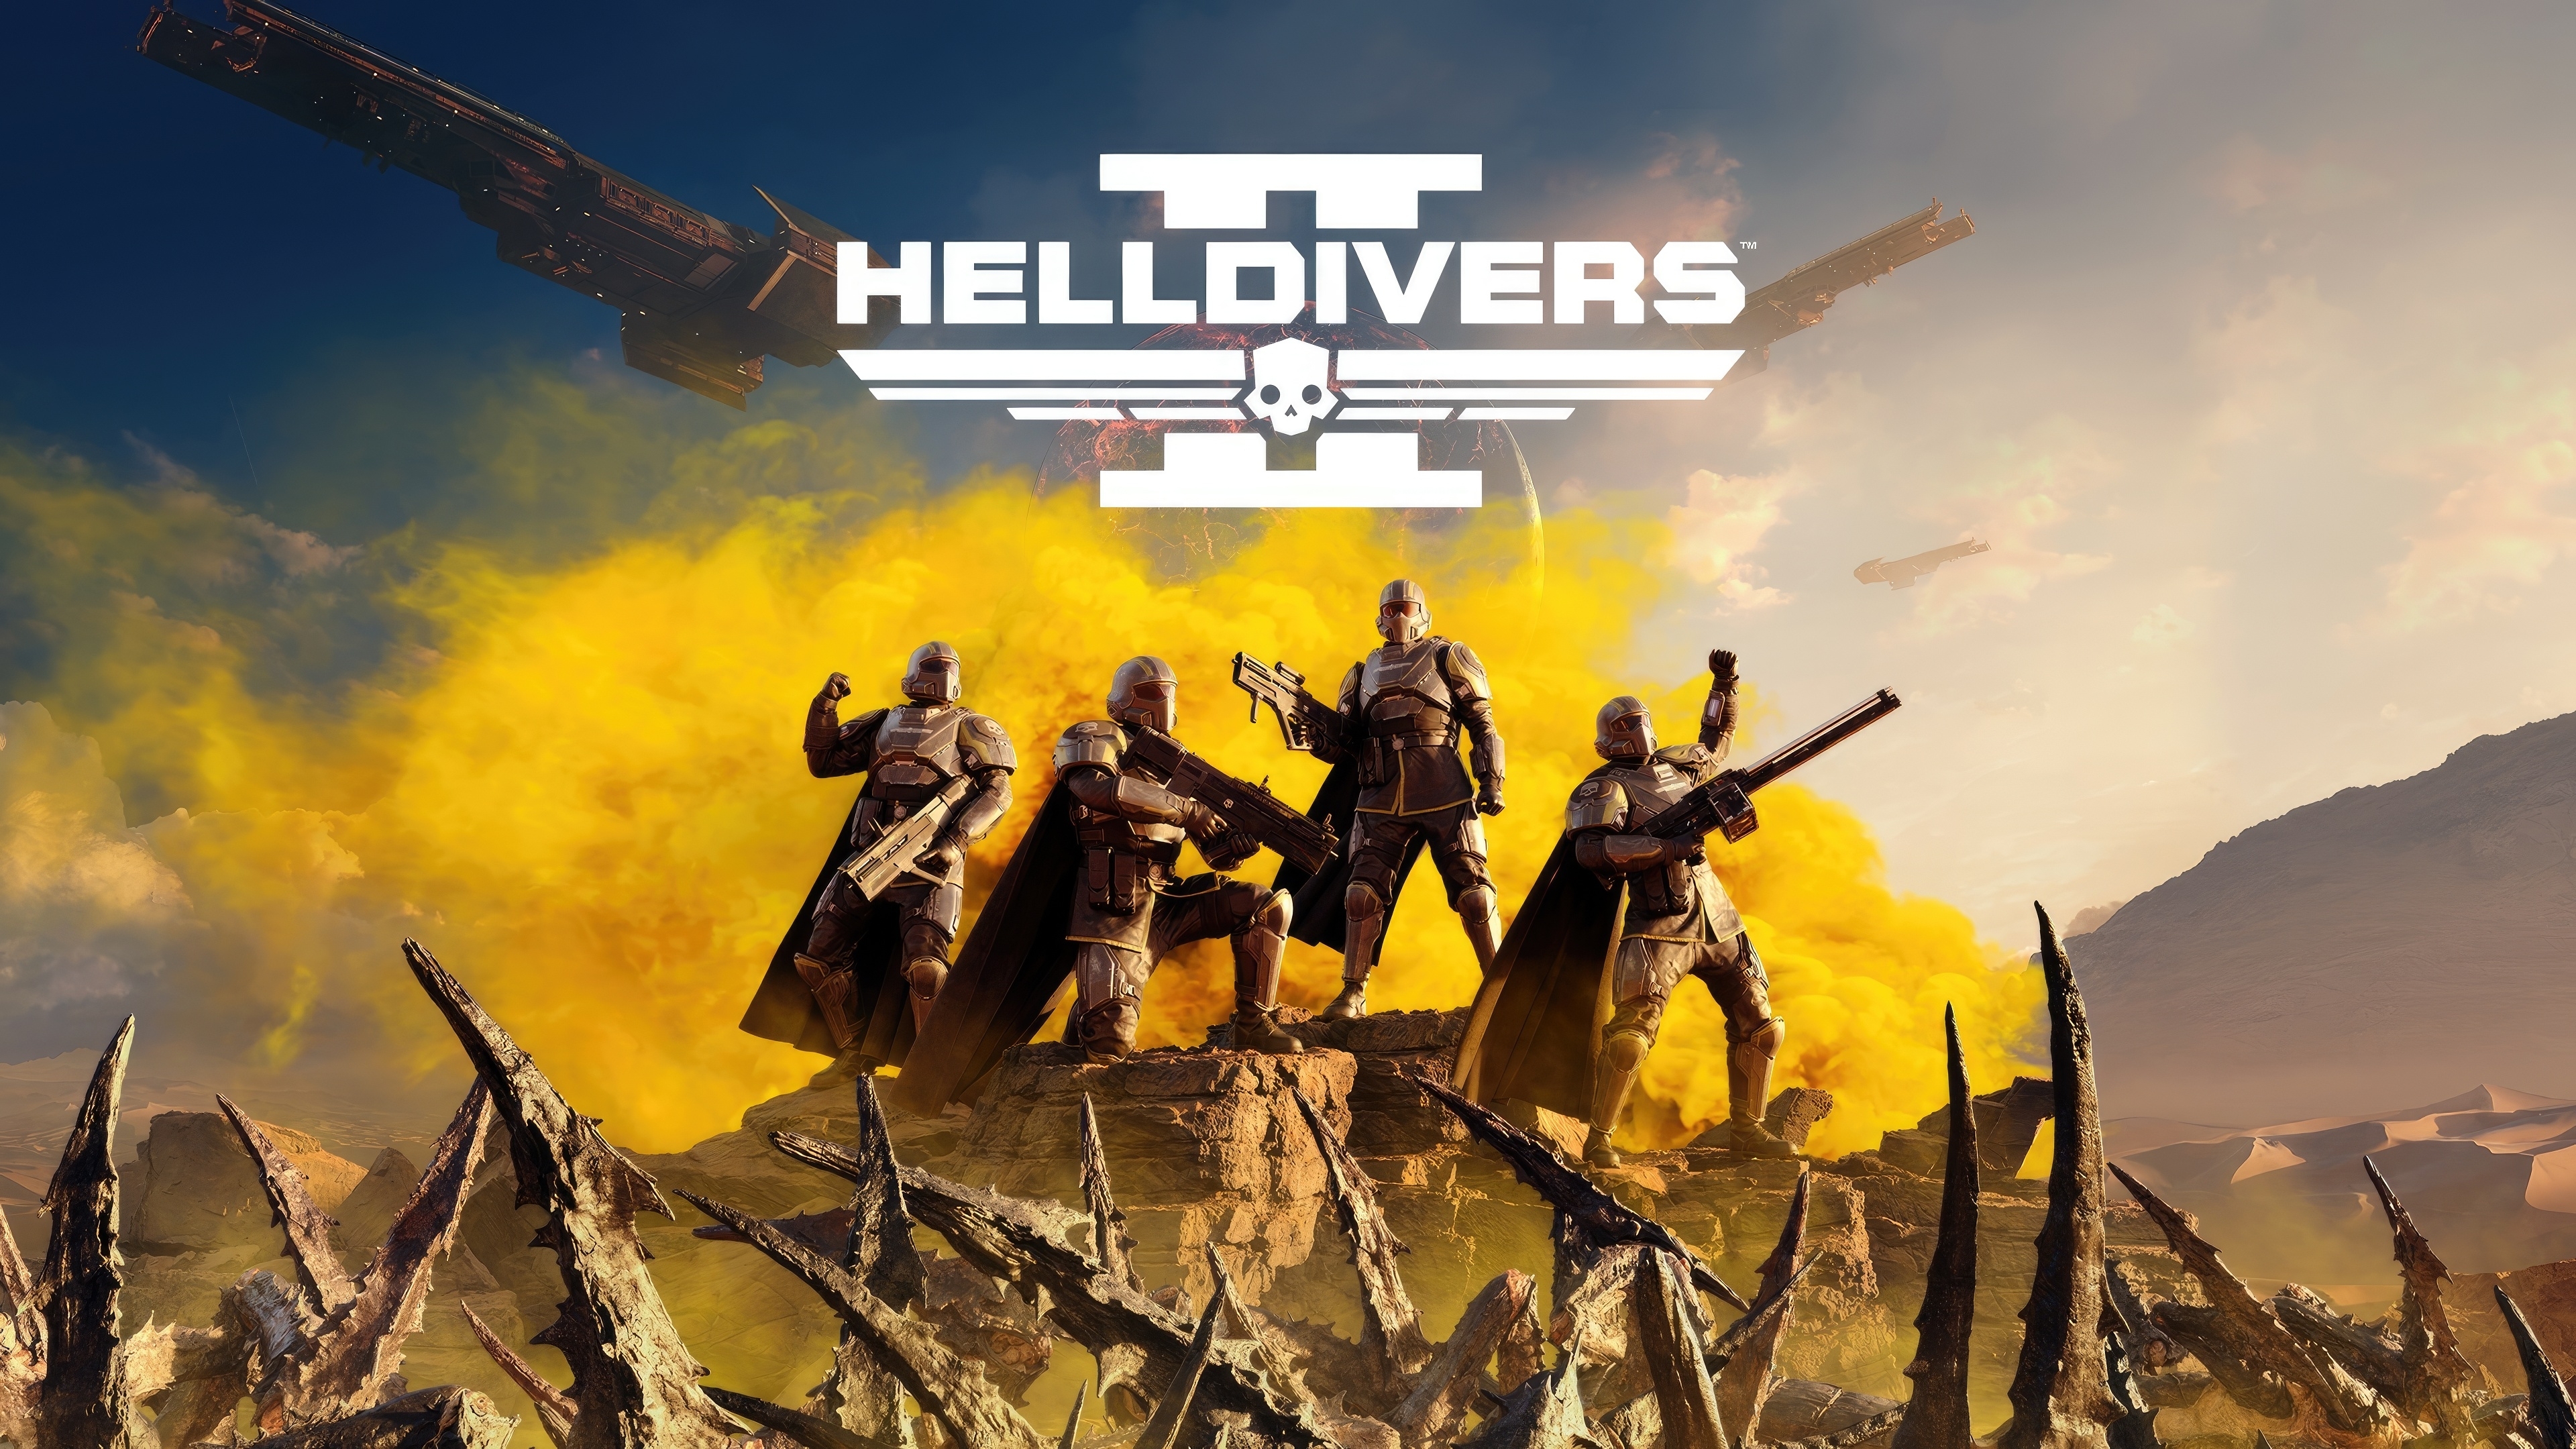 helldivers-2-pc-game-steam-europe-cover.jpg